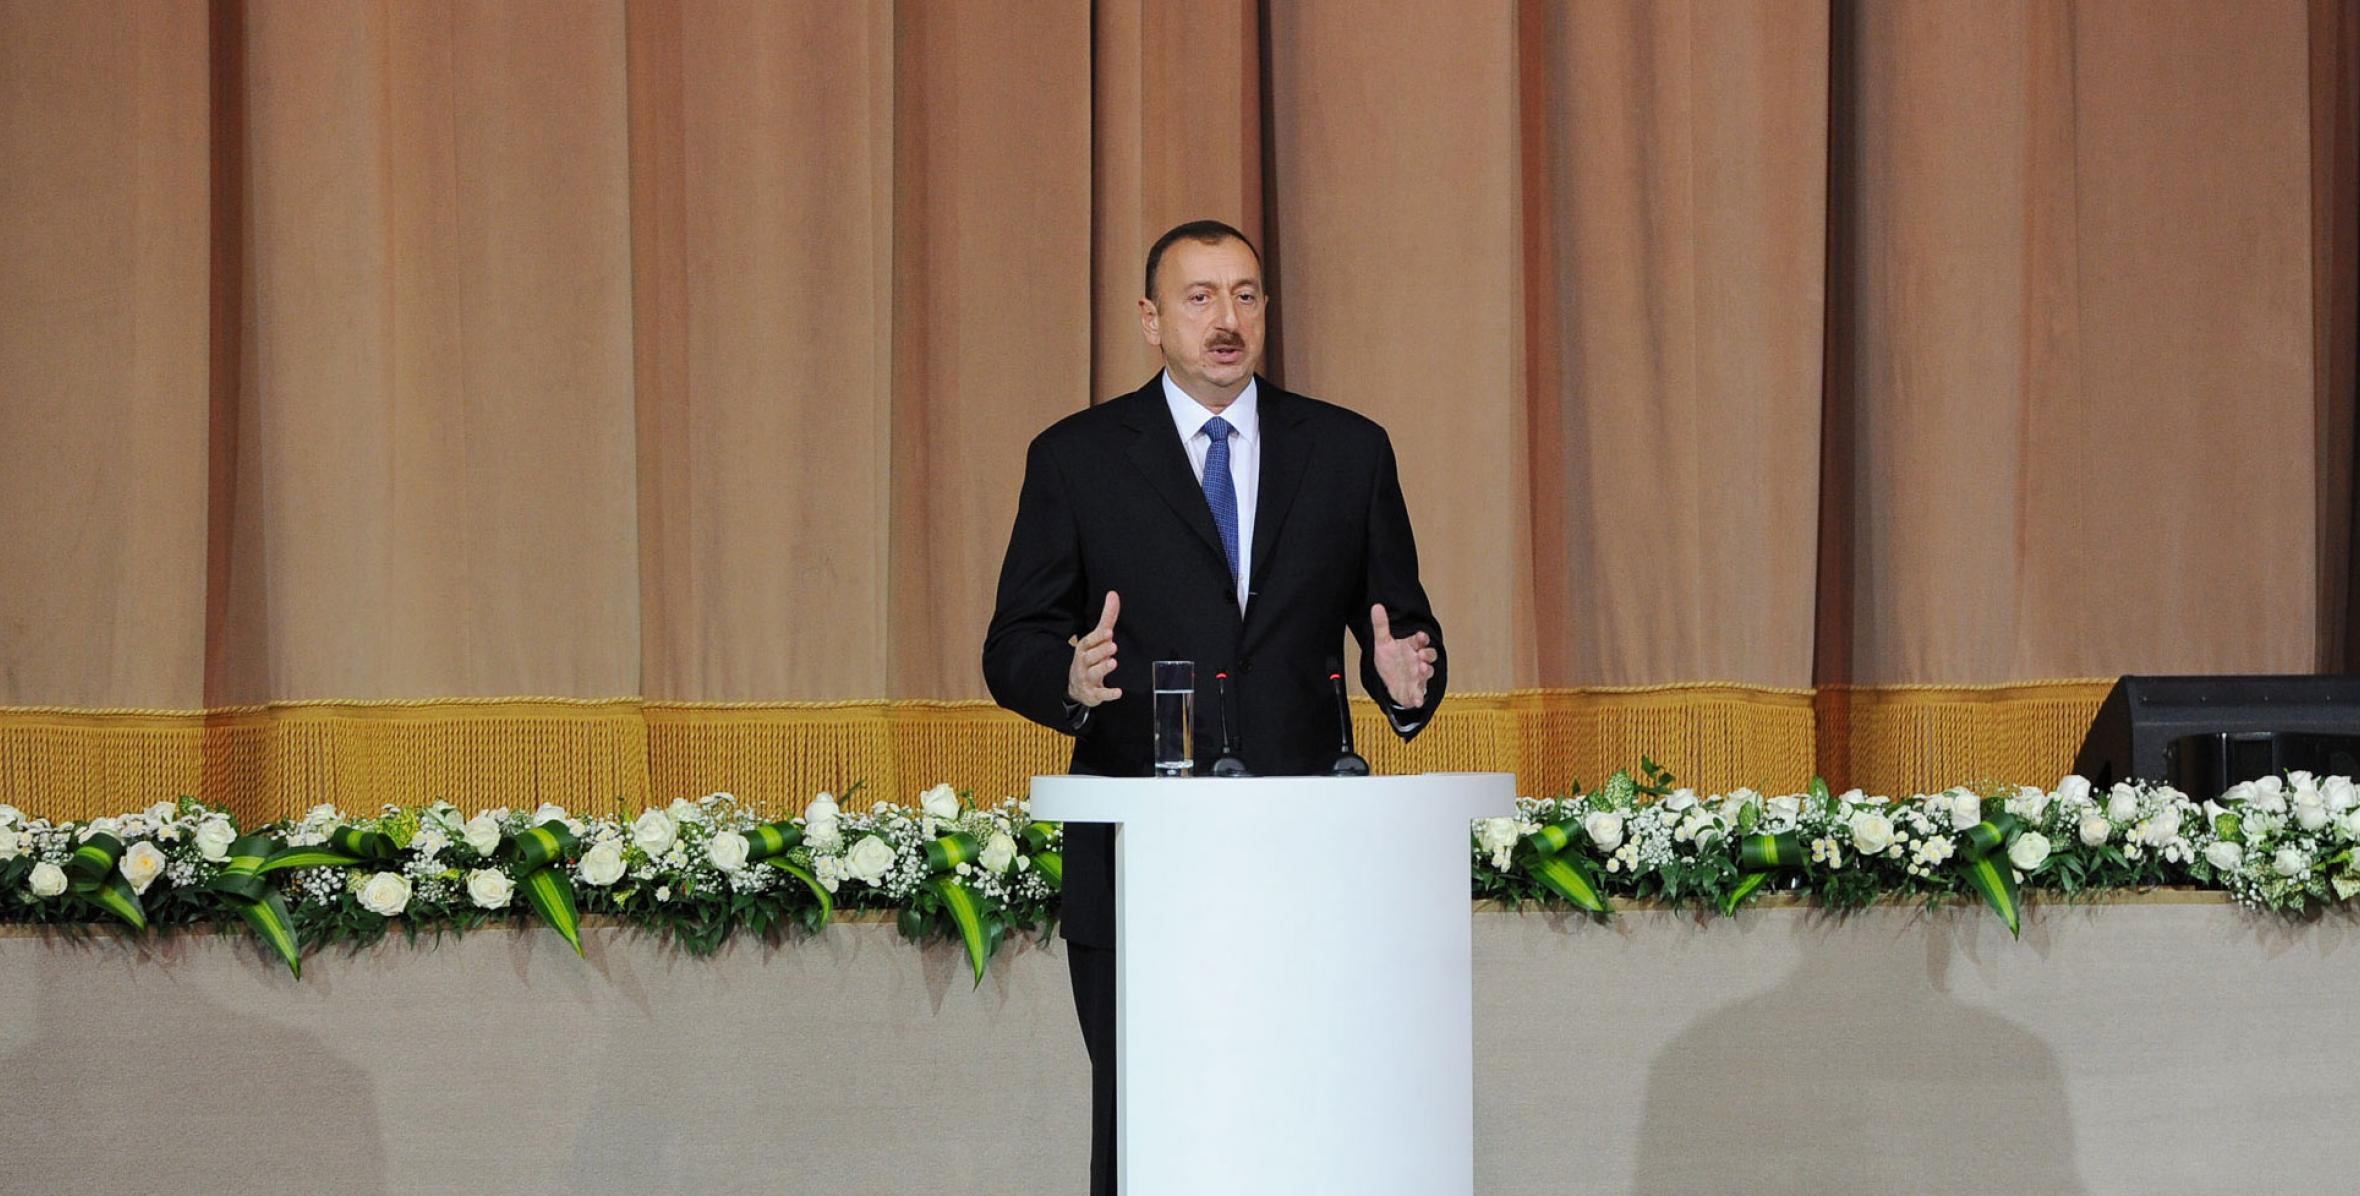 Speech by Ilham Aliyev at the reception to mark the 20th anniversary of the establishment of the “Yeni Azerbaijan Party”